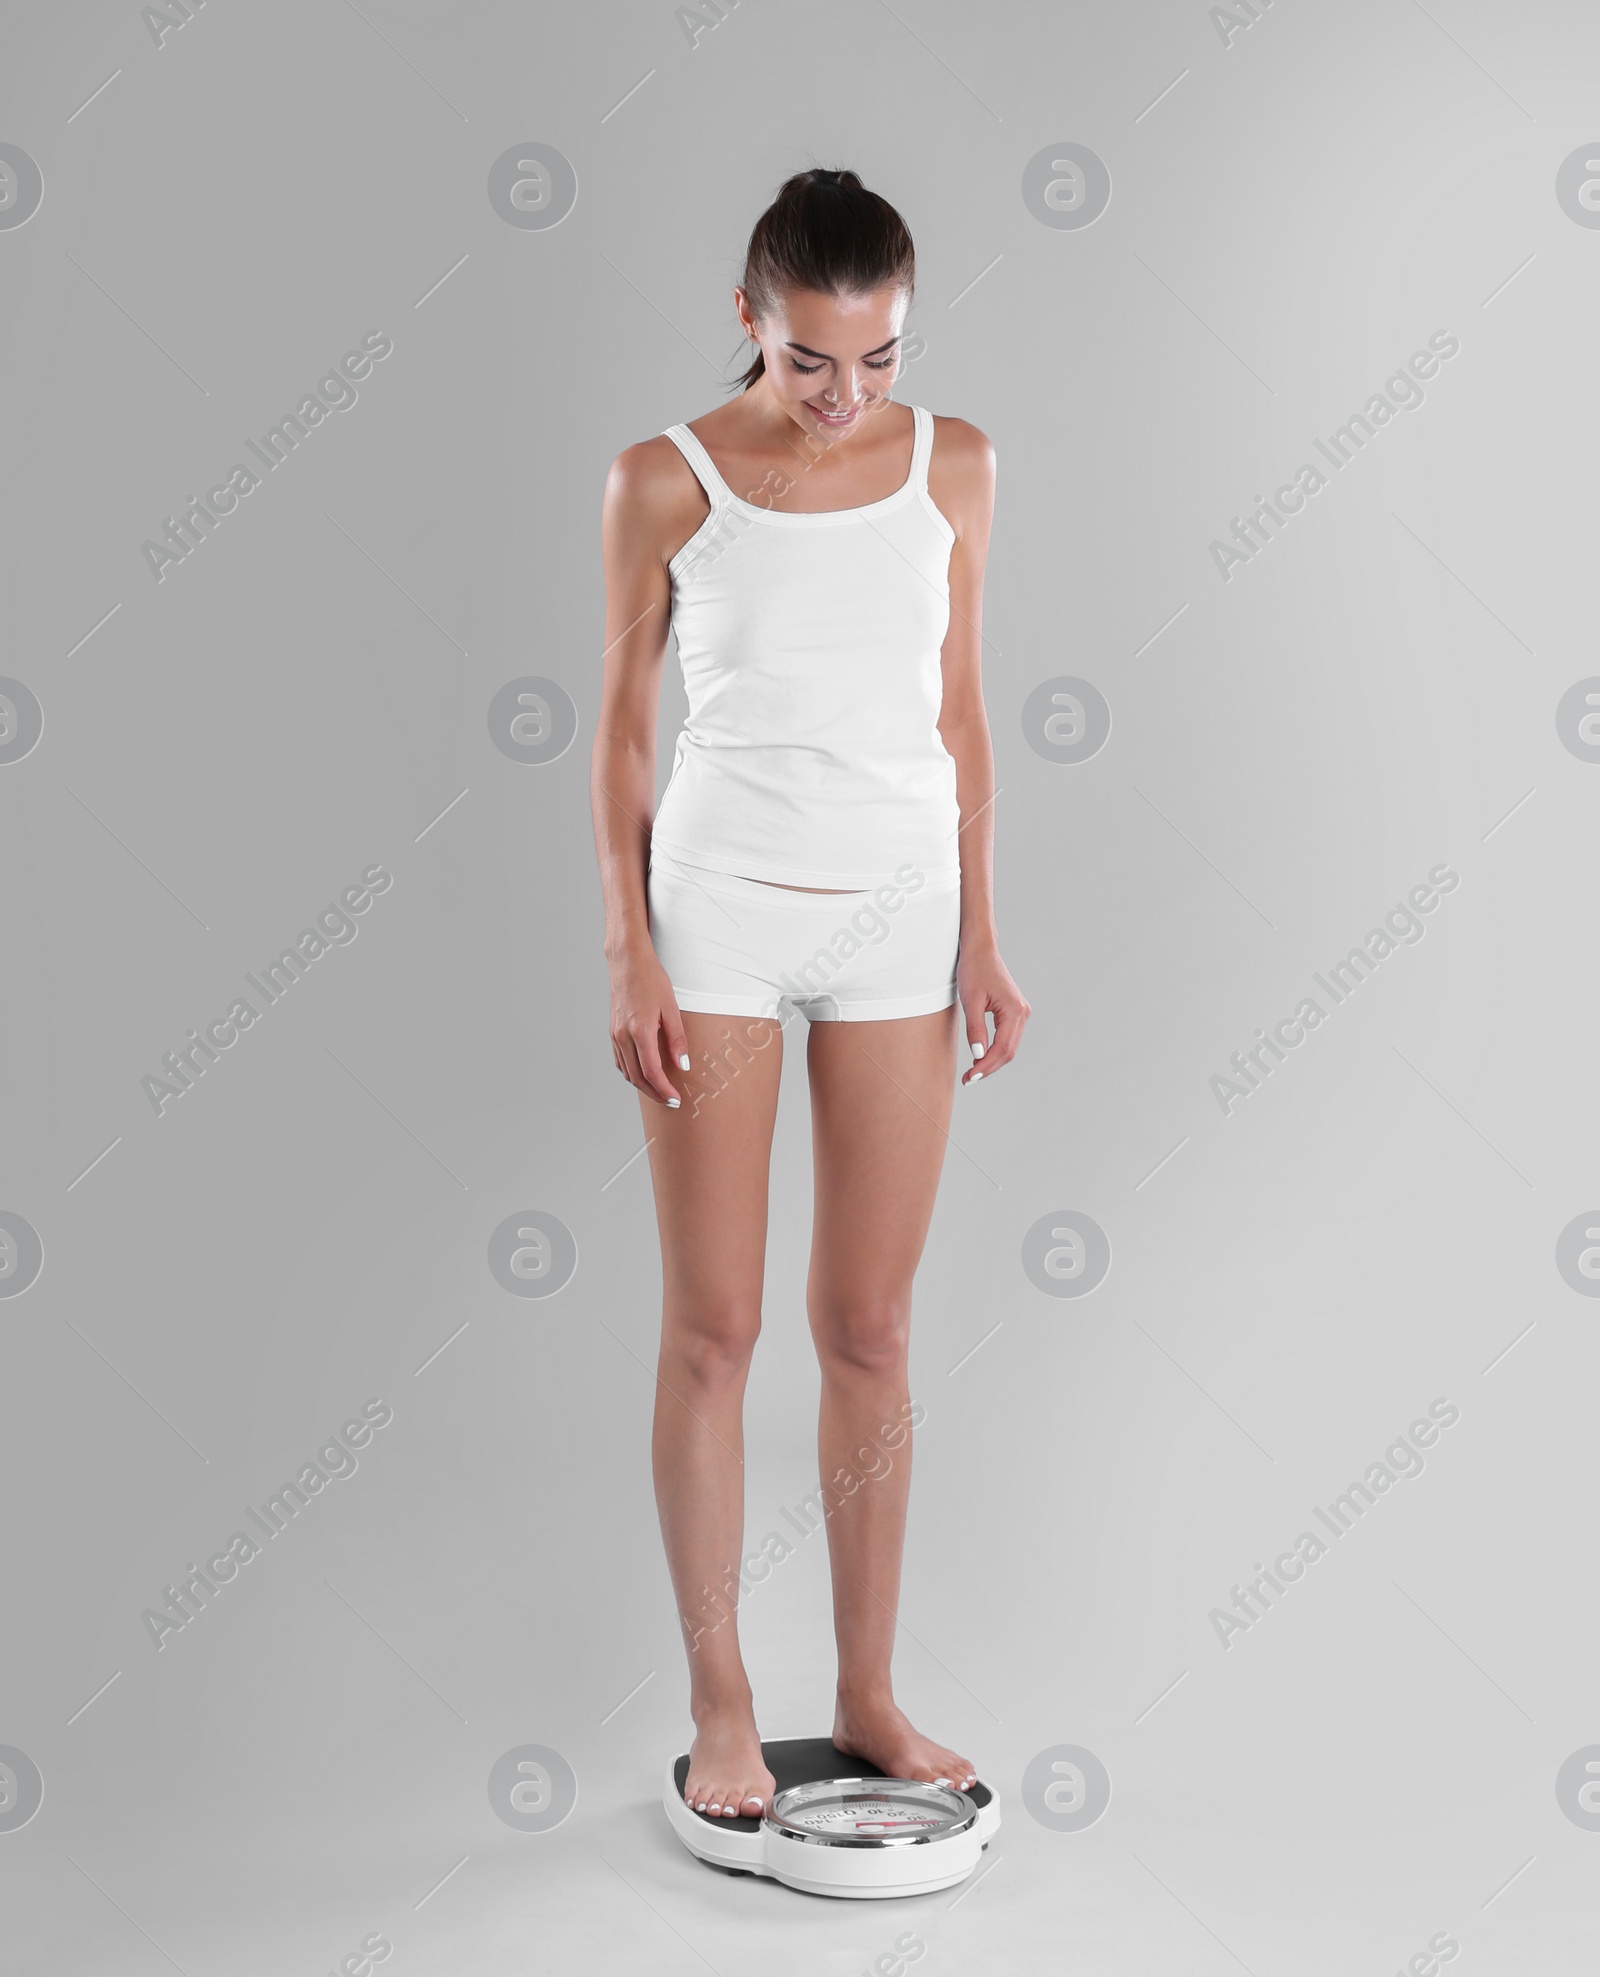 Photo of Happy young woman measuring her weight using scales on color background. Weight loss motivation